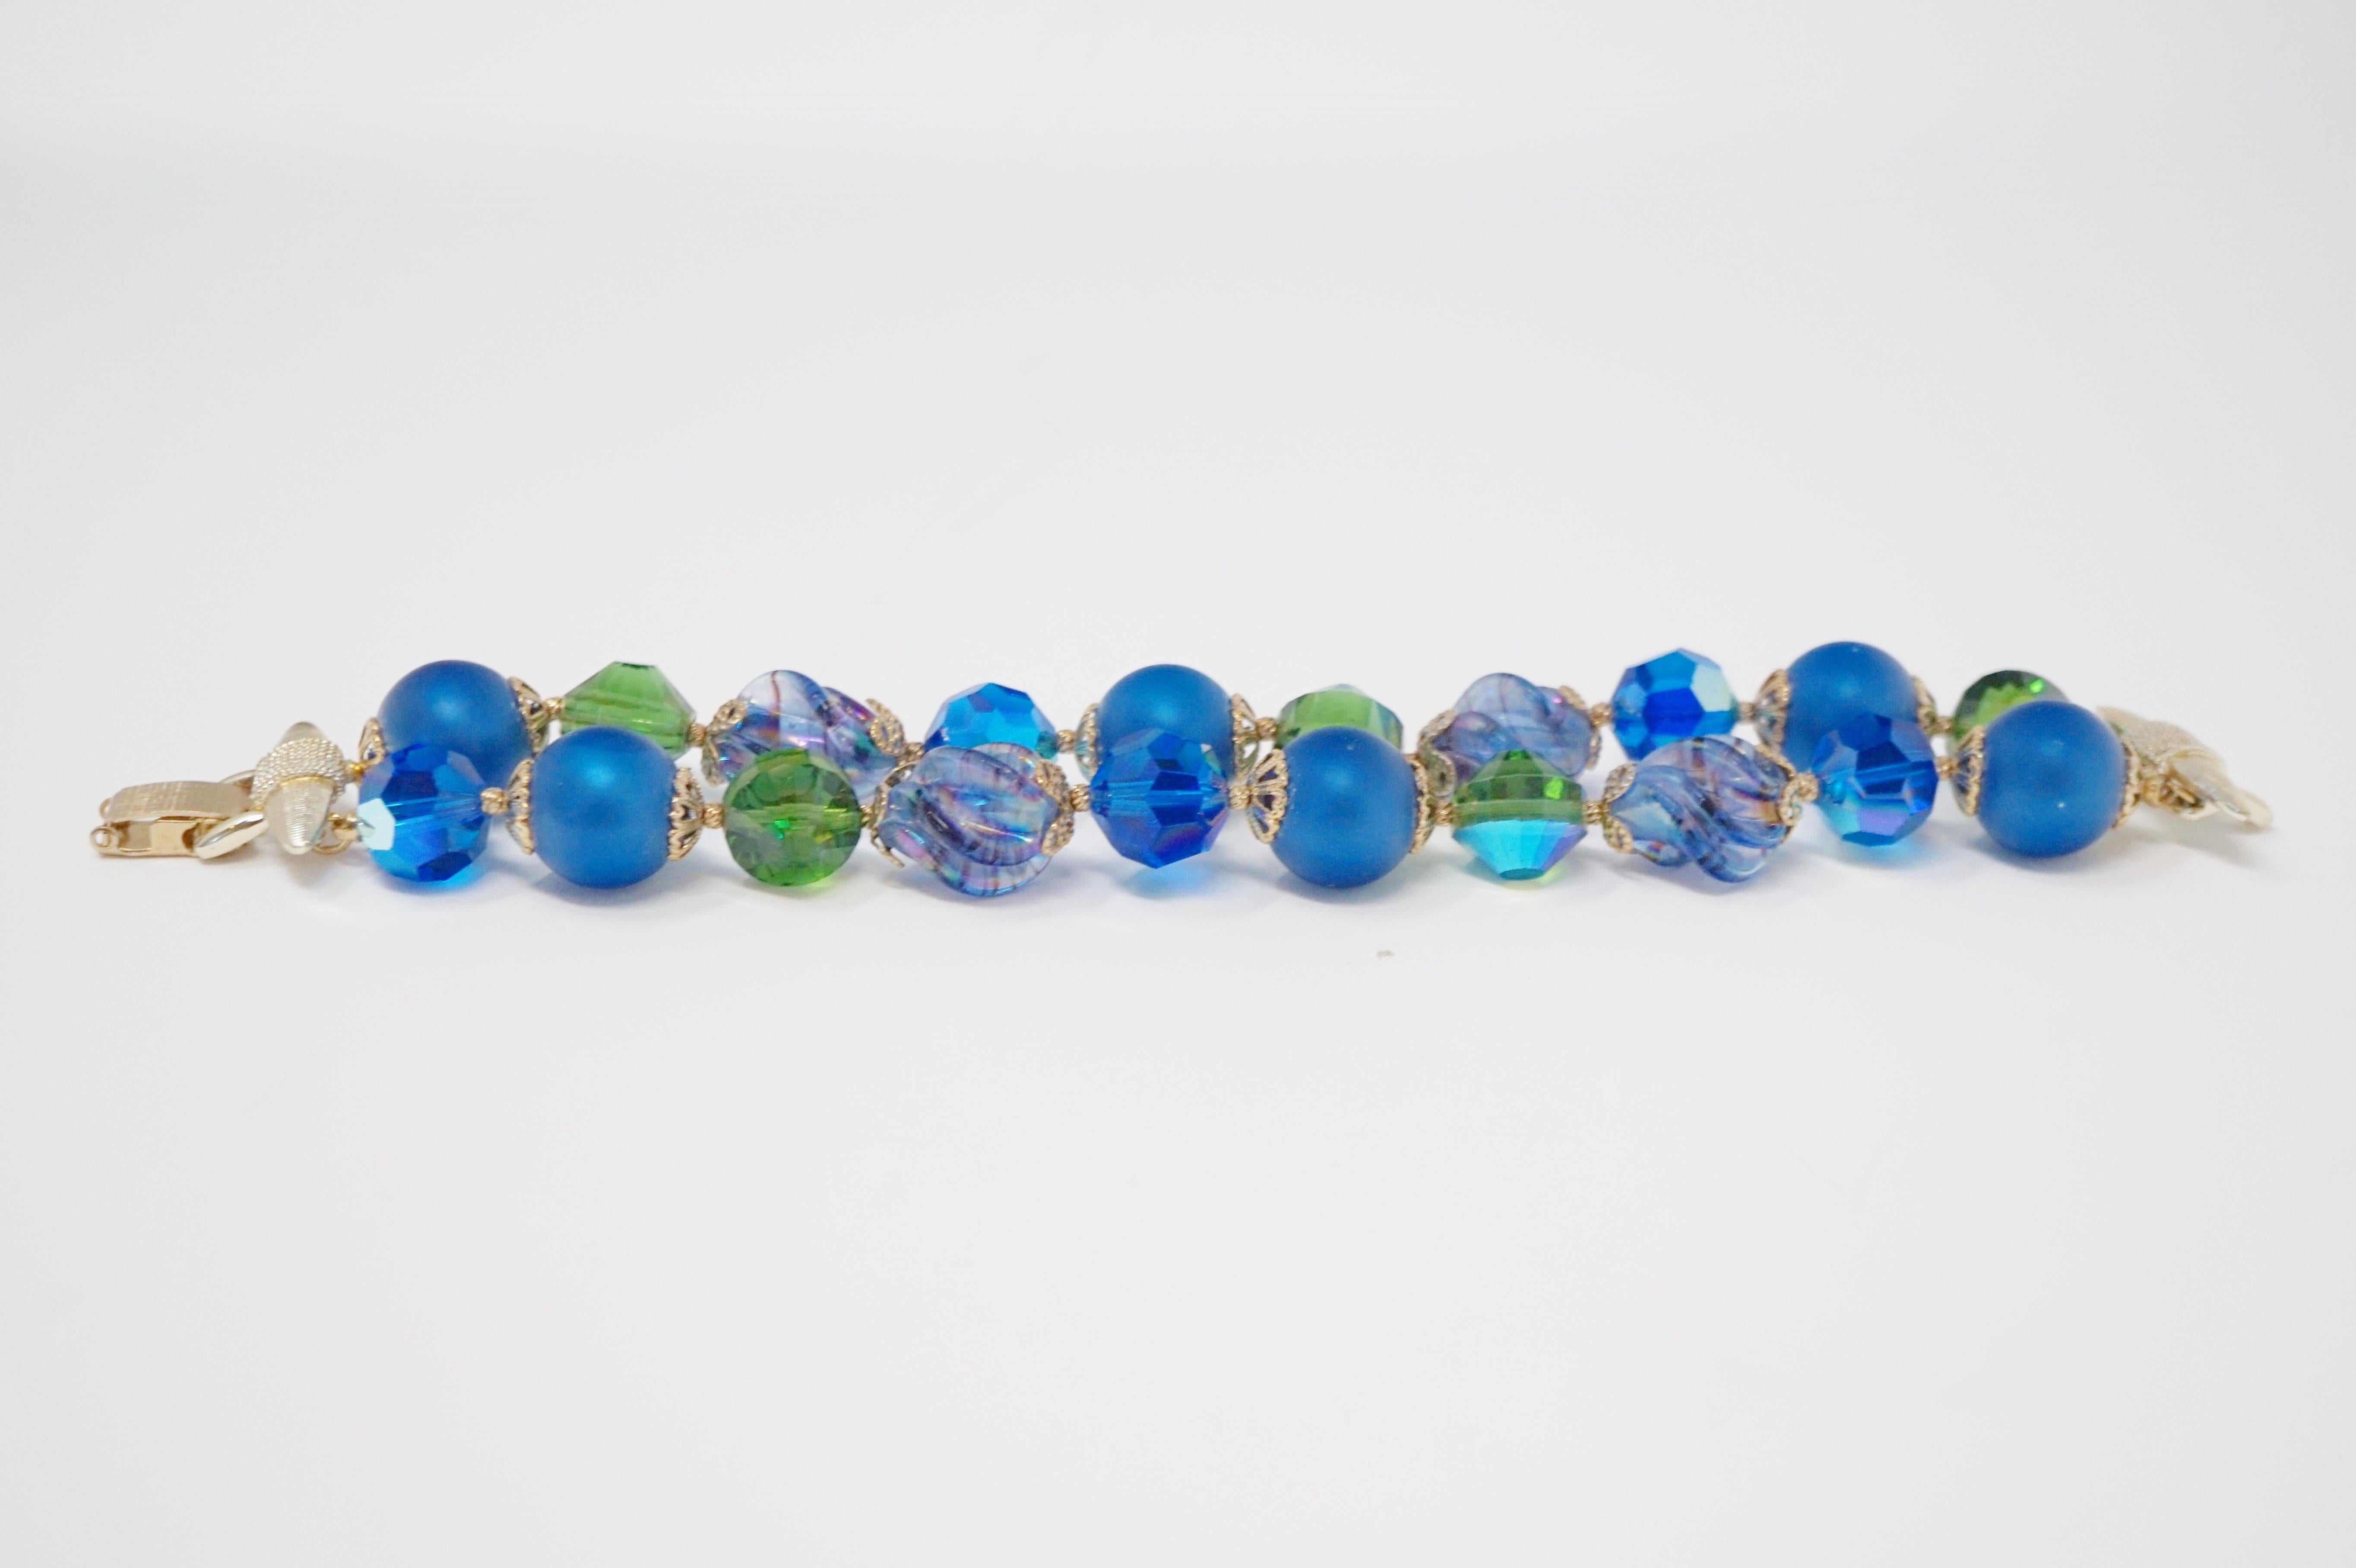 This exquisite double strand beaded bracelet by Vendome features a mix of matte cobalt blue beads, mercury glass beads and Aurora Borealis iridescent crystal beads with gold tone accents. Signed Vendome on gold tone clasp.  

Operated as a